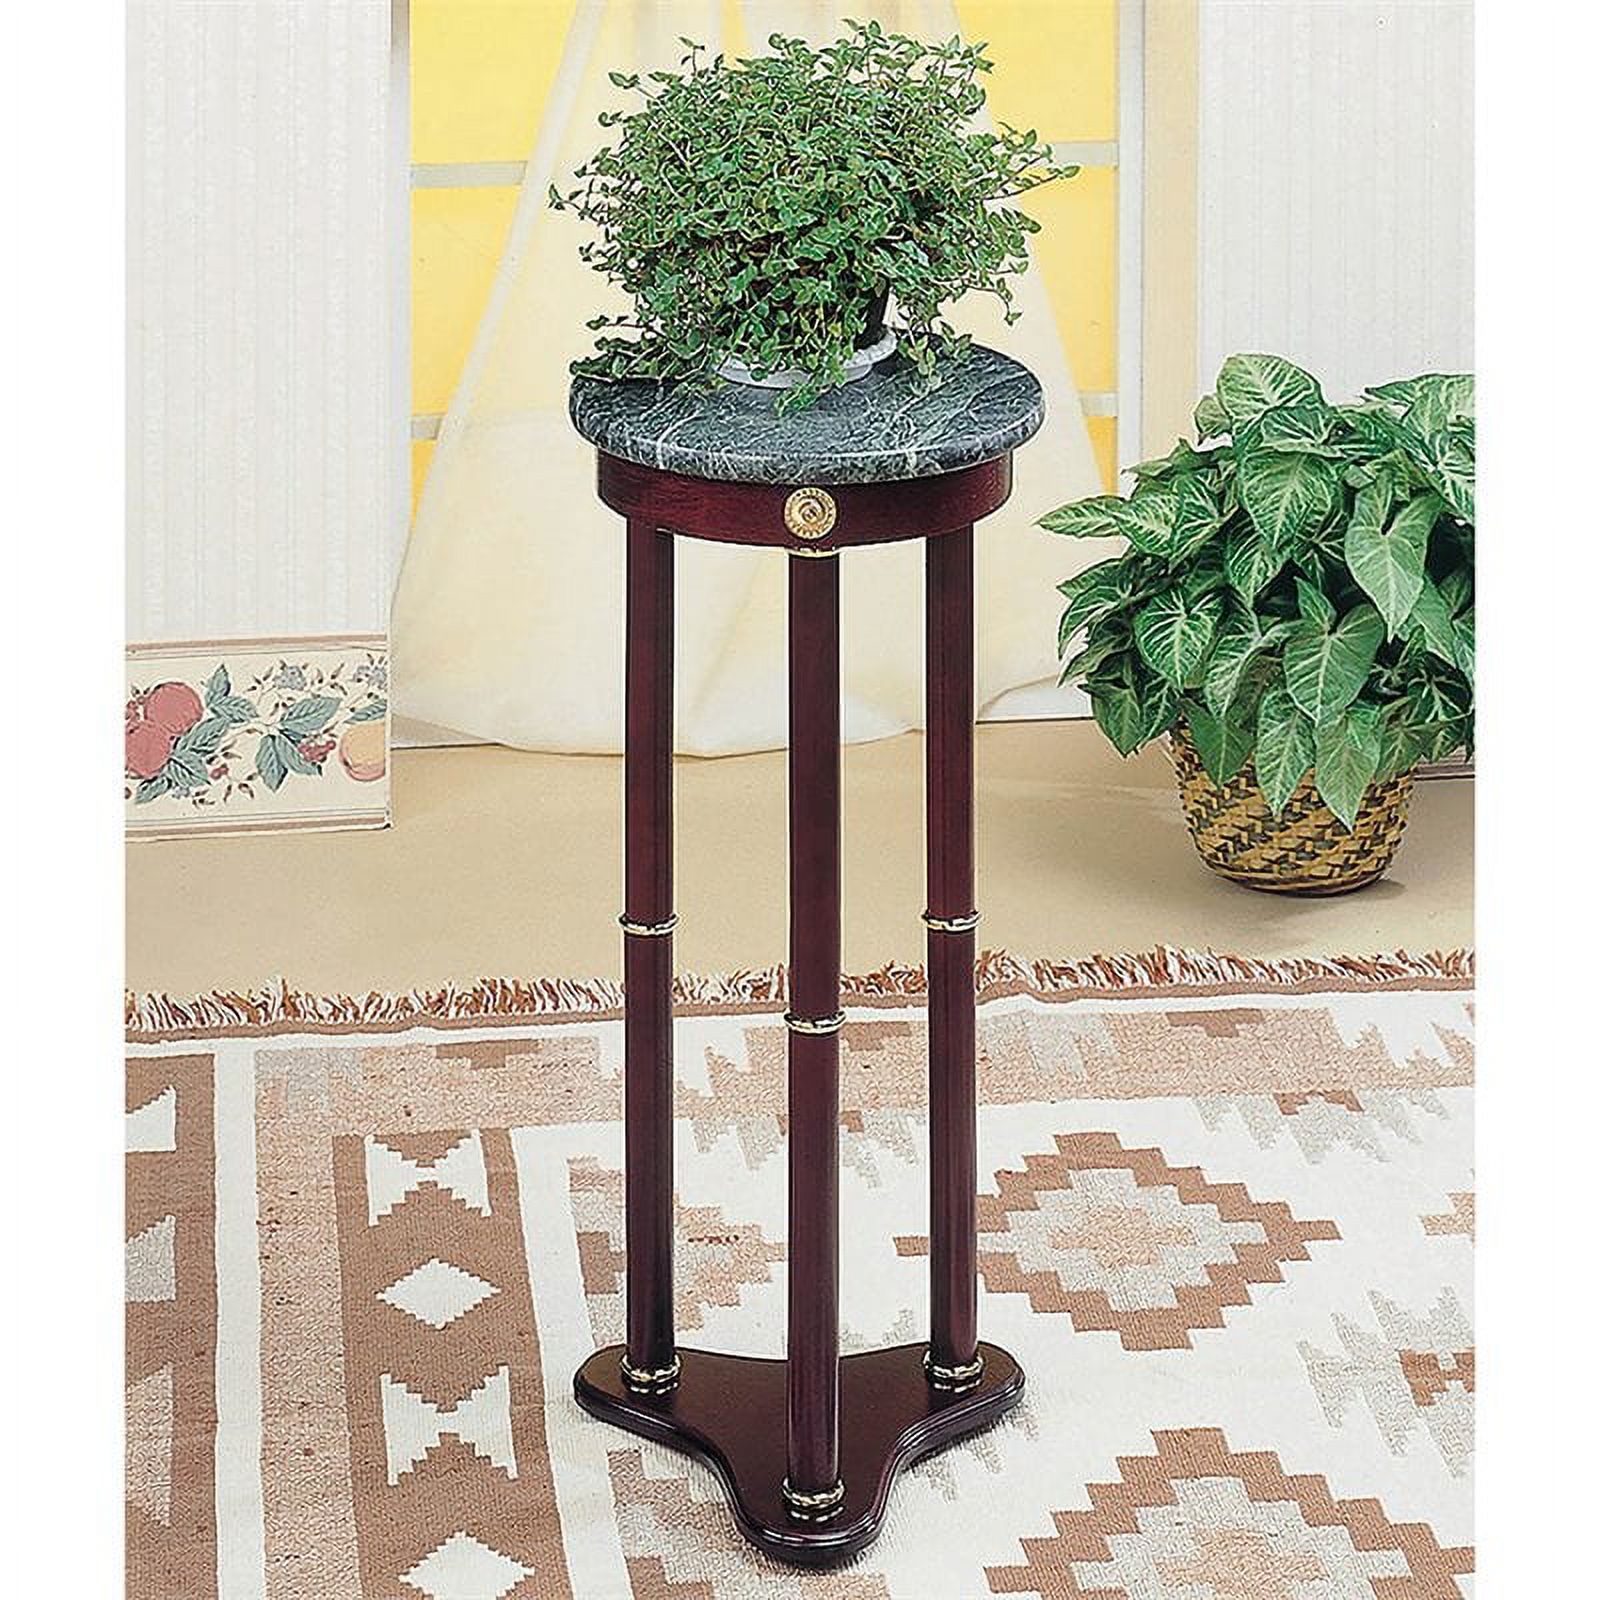 Bowery Hill Round Marble Top Plant Stand in Merlot and Green - image 2 of 2